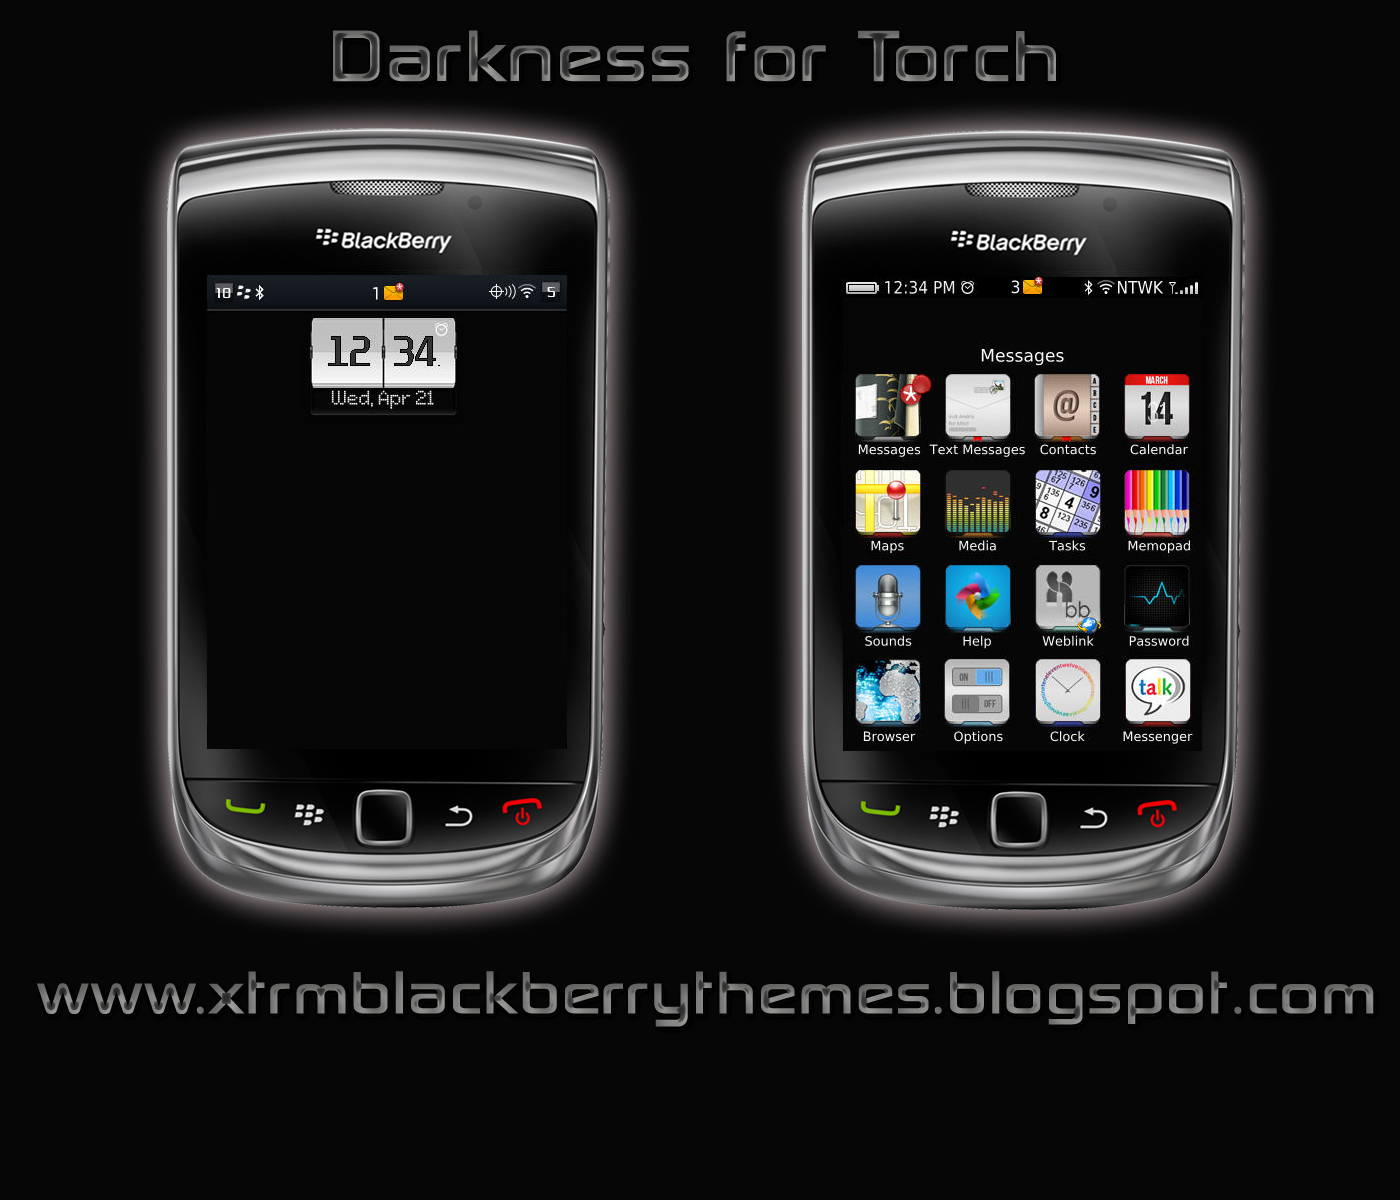 free 720p wallpapers: Hd Wallpapers Blackberry Torch 9860